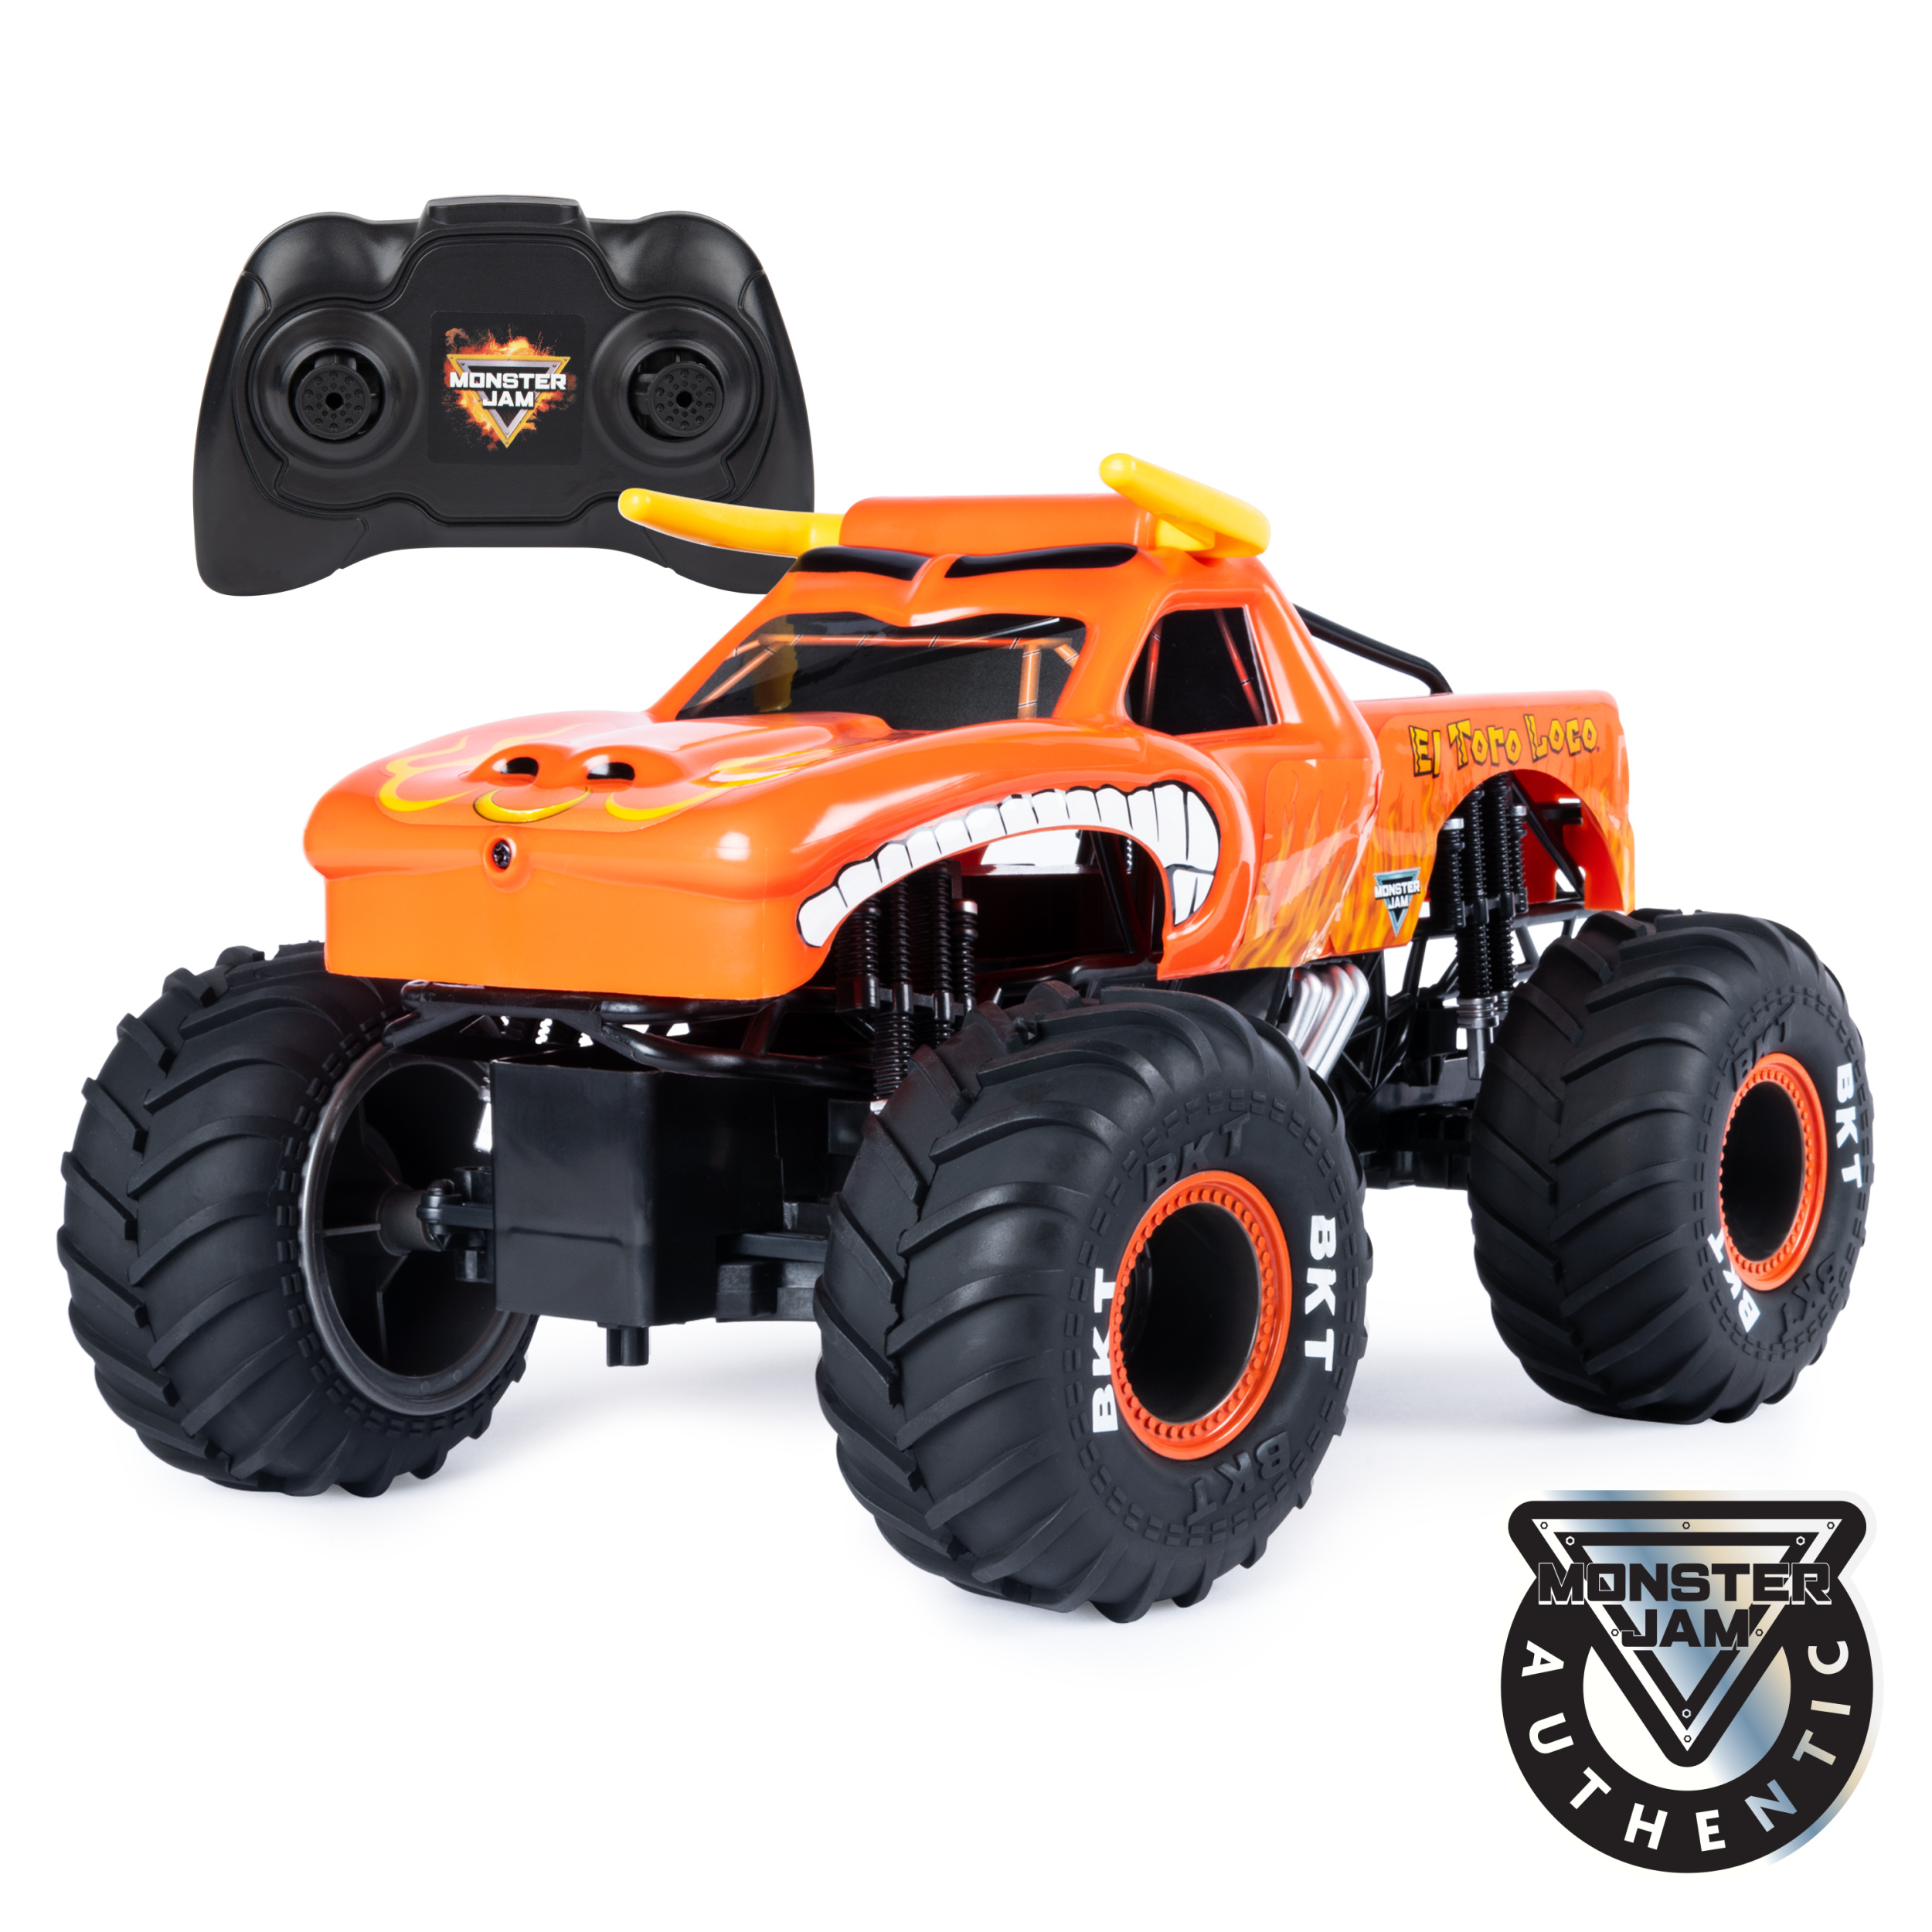 Monster Jam, Official El Toro Loco Remote Control Monster Truck, 1:15 Scale, 2.4 GHz - image 1 of 9